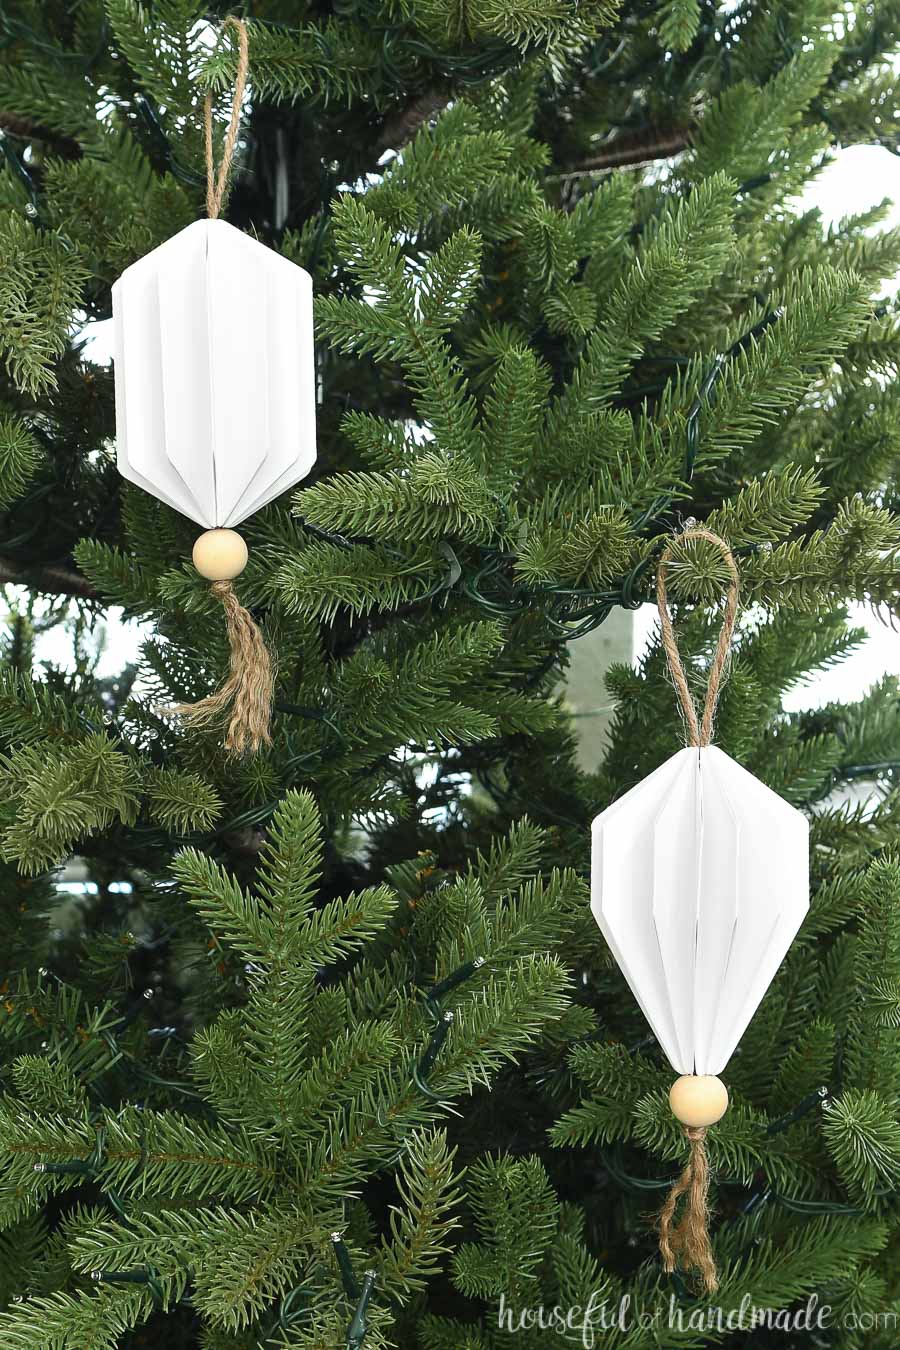 Two jewel shaped Christmas ornaments made from paper hanging on a Christmas tree.